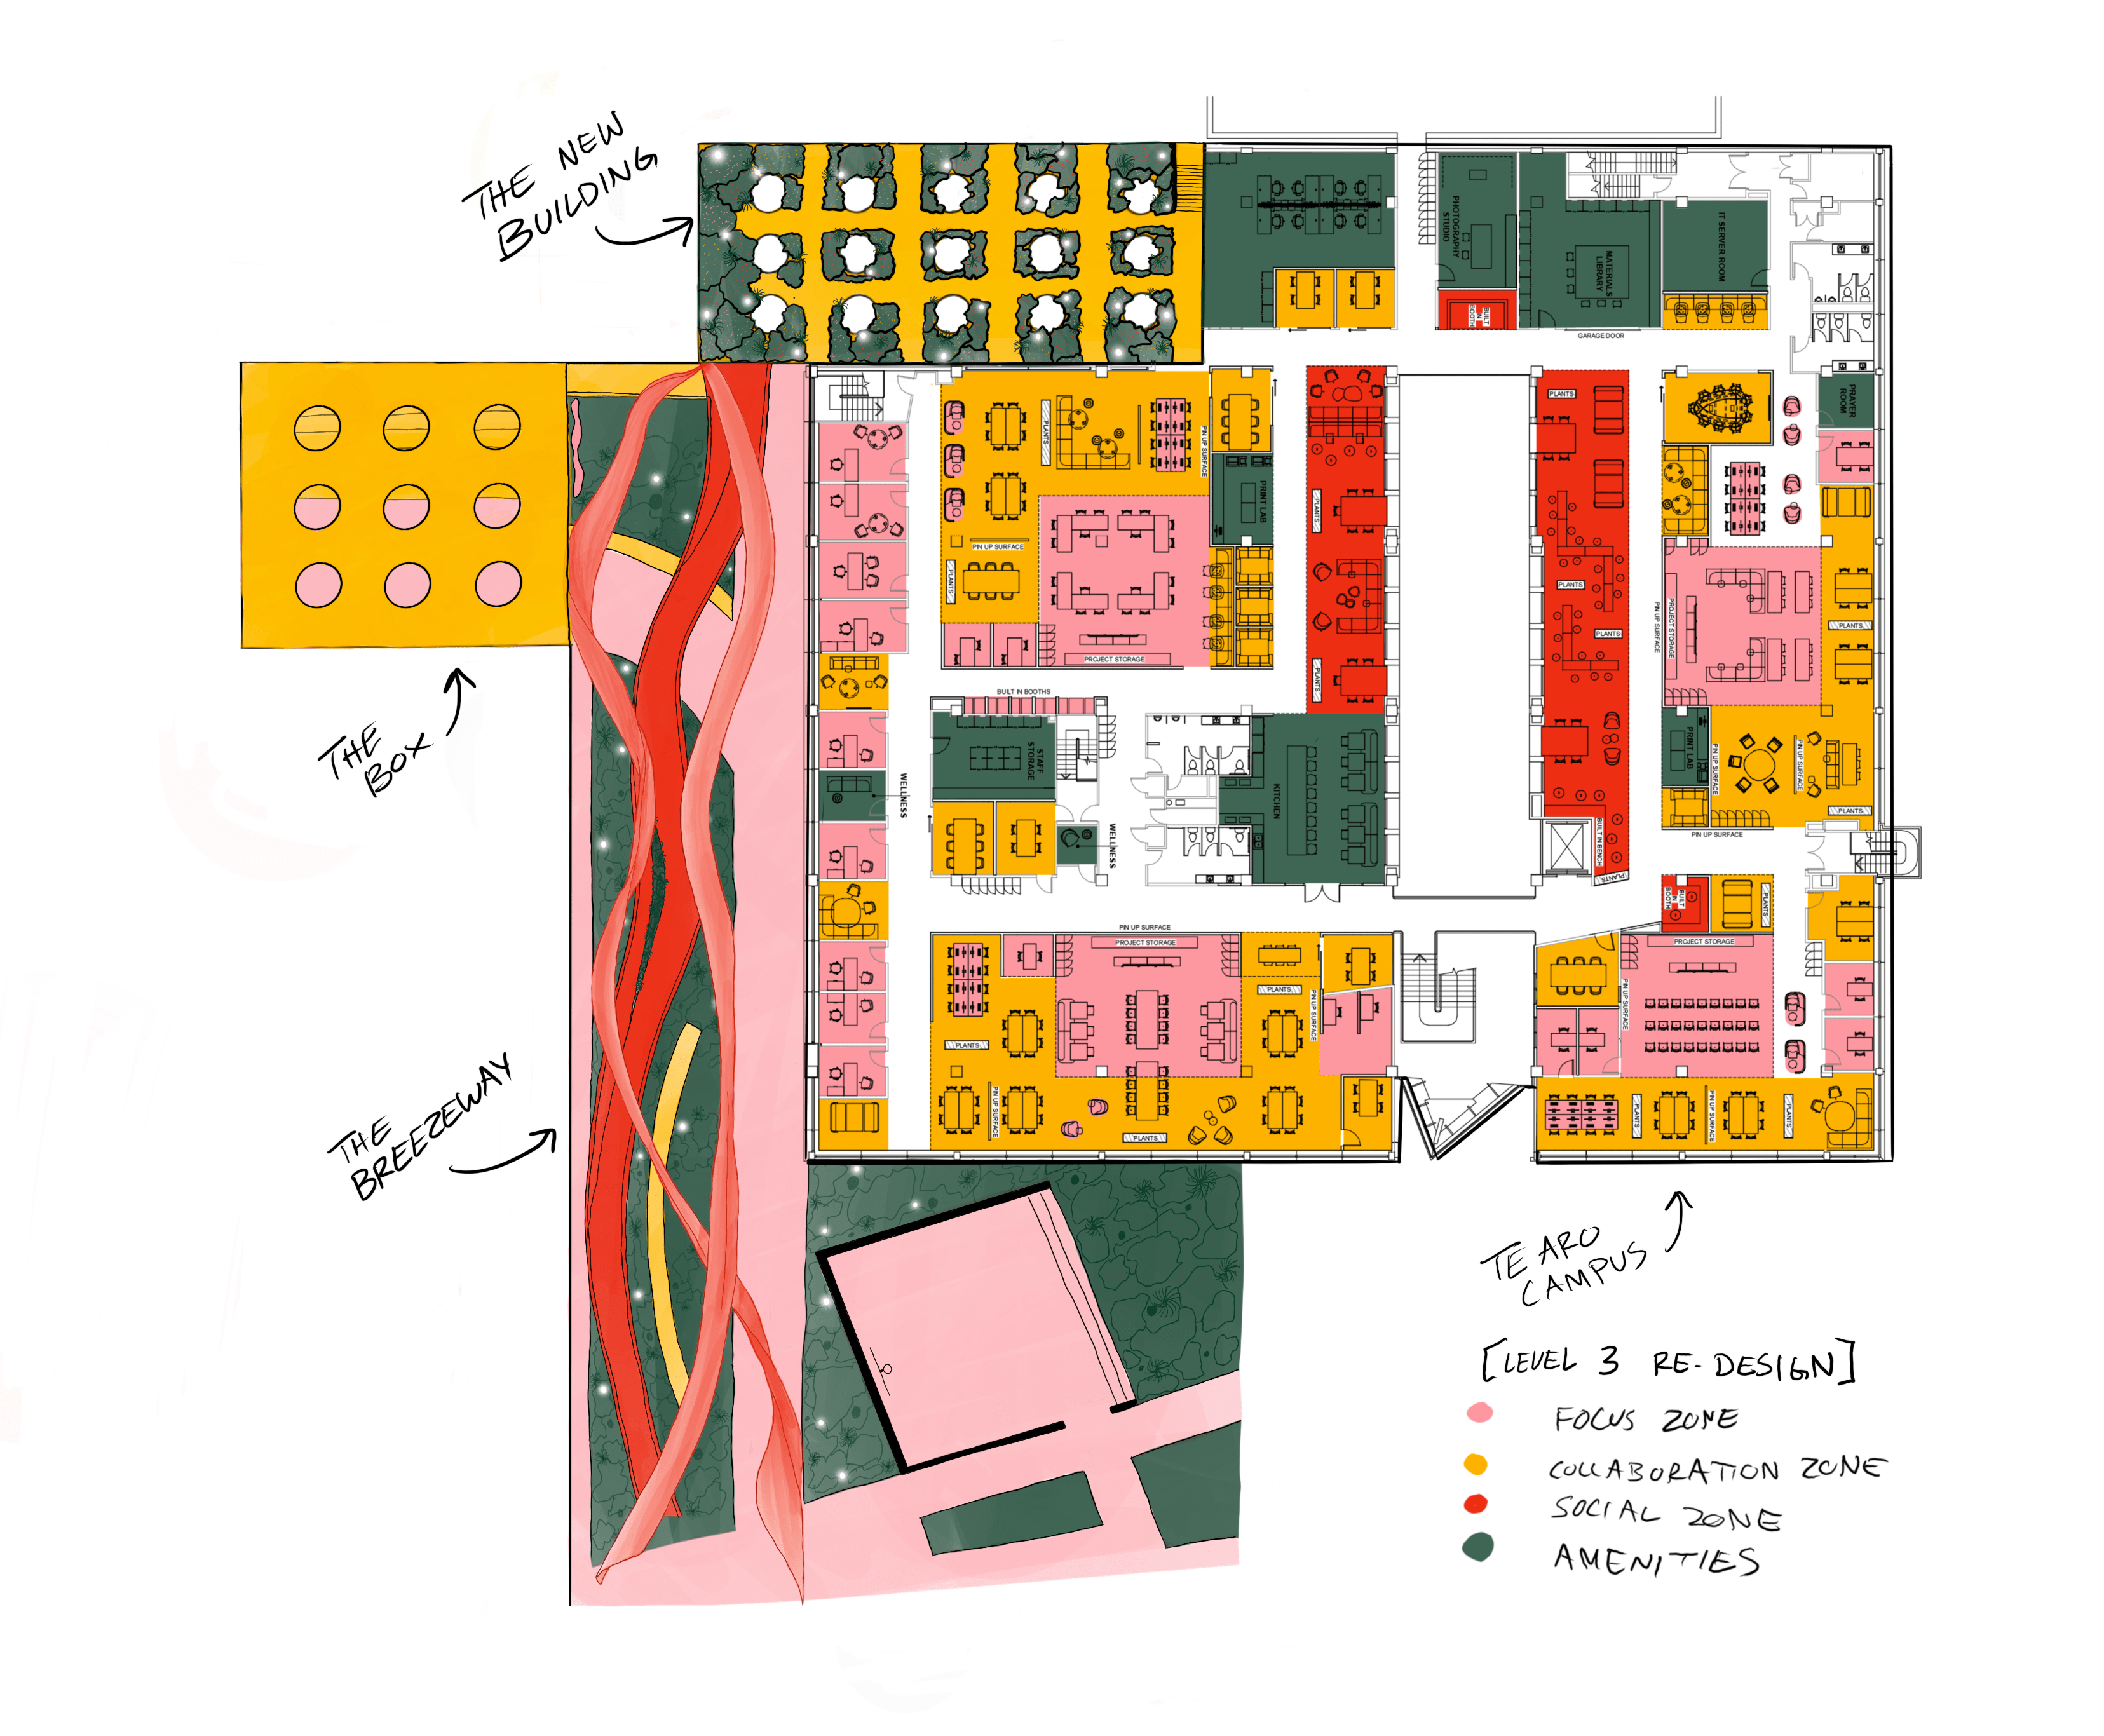 A plan-view of the breezeway moving through the school building.